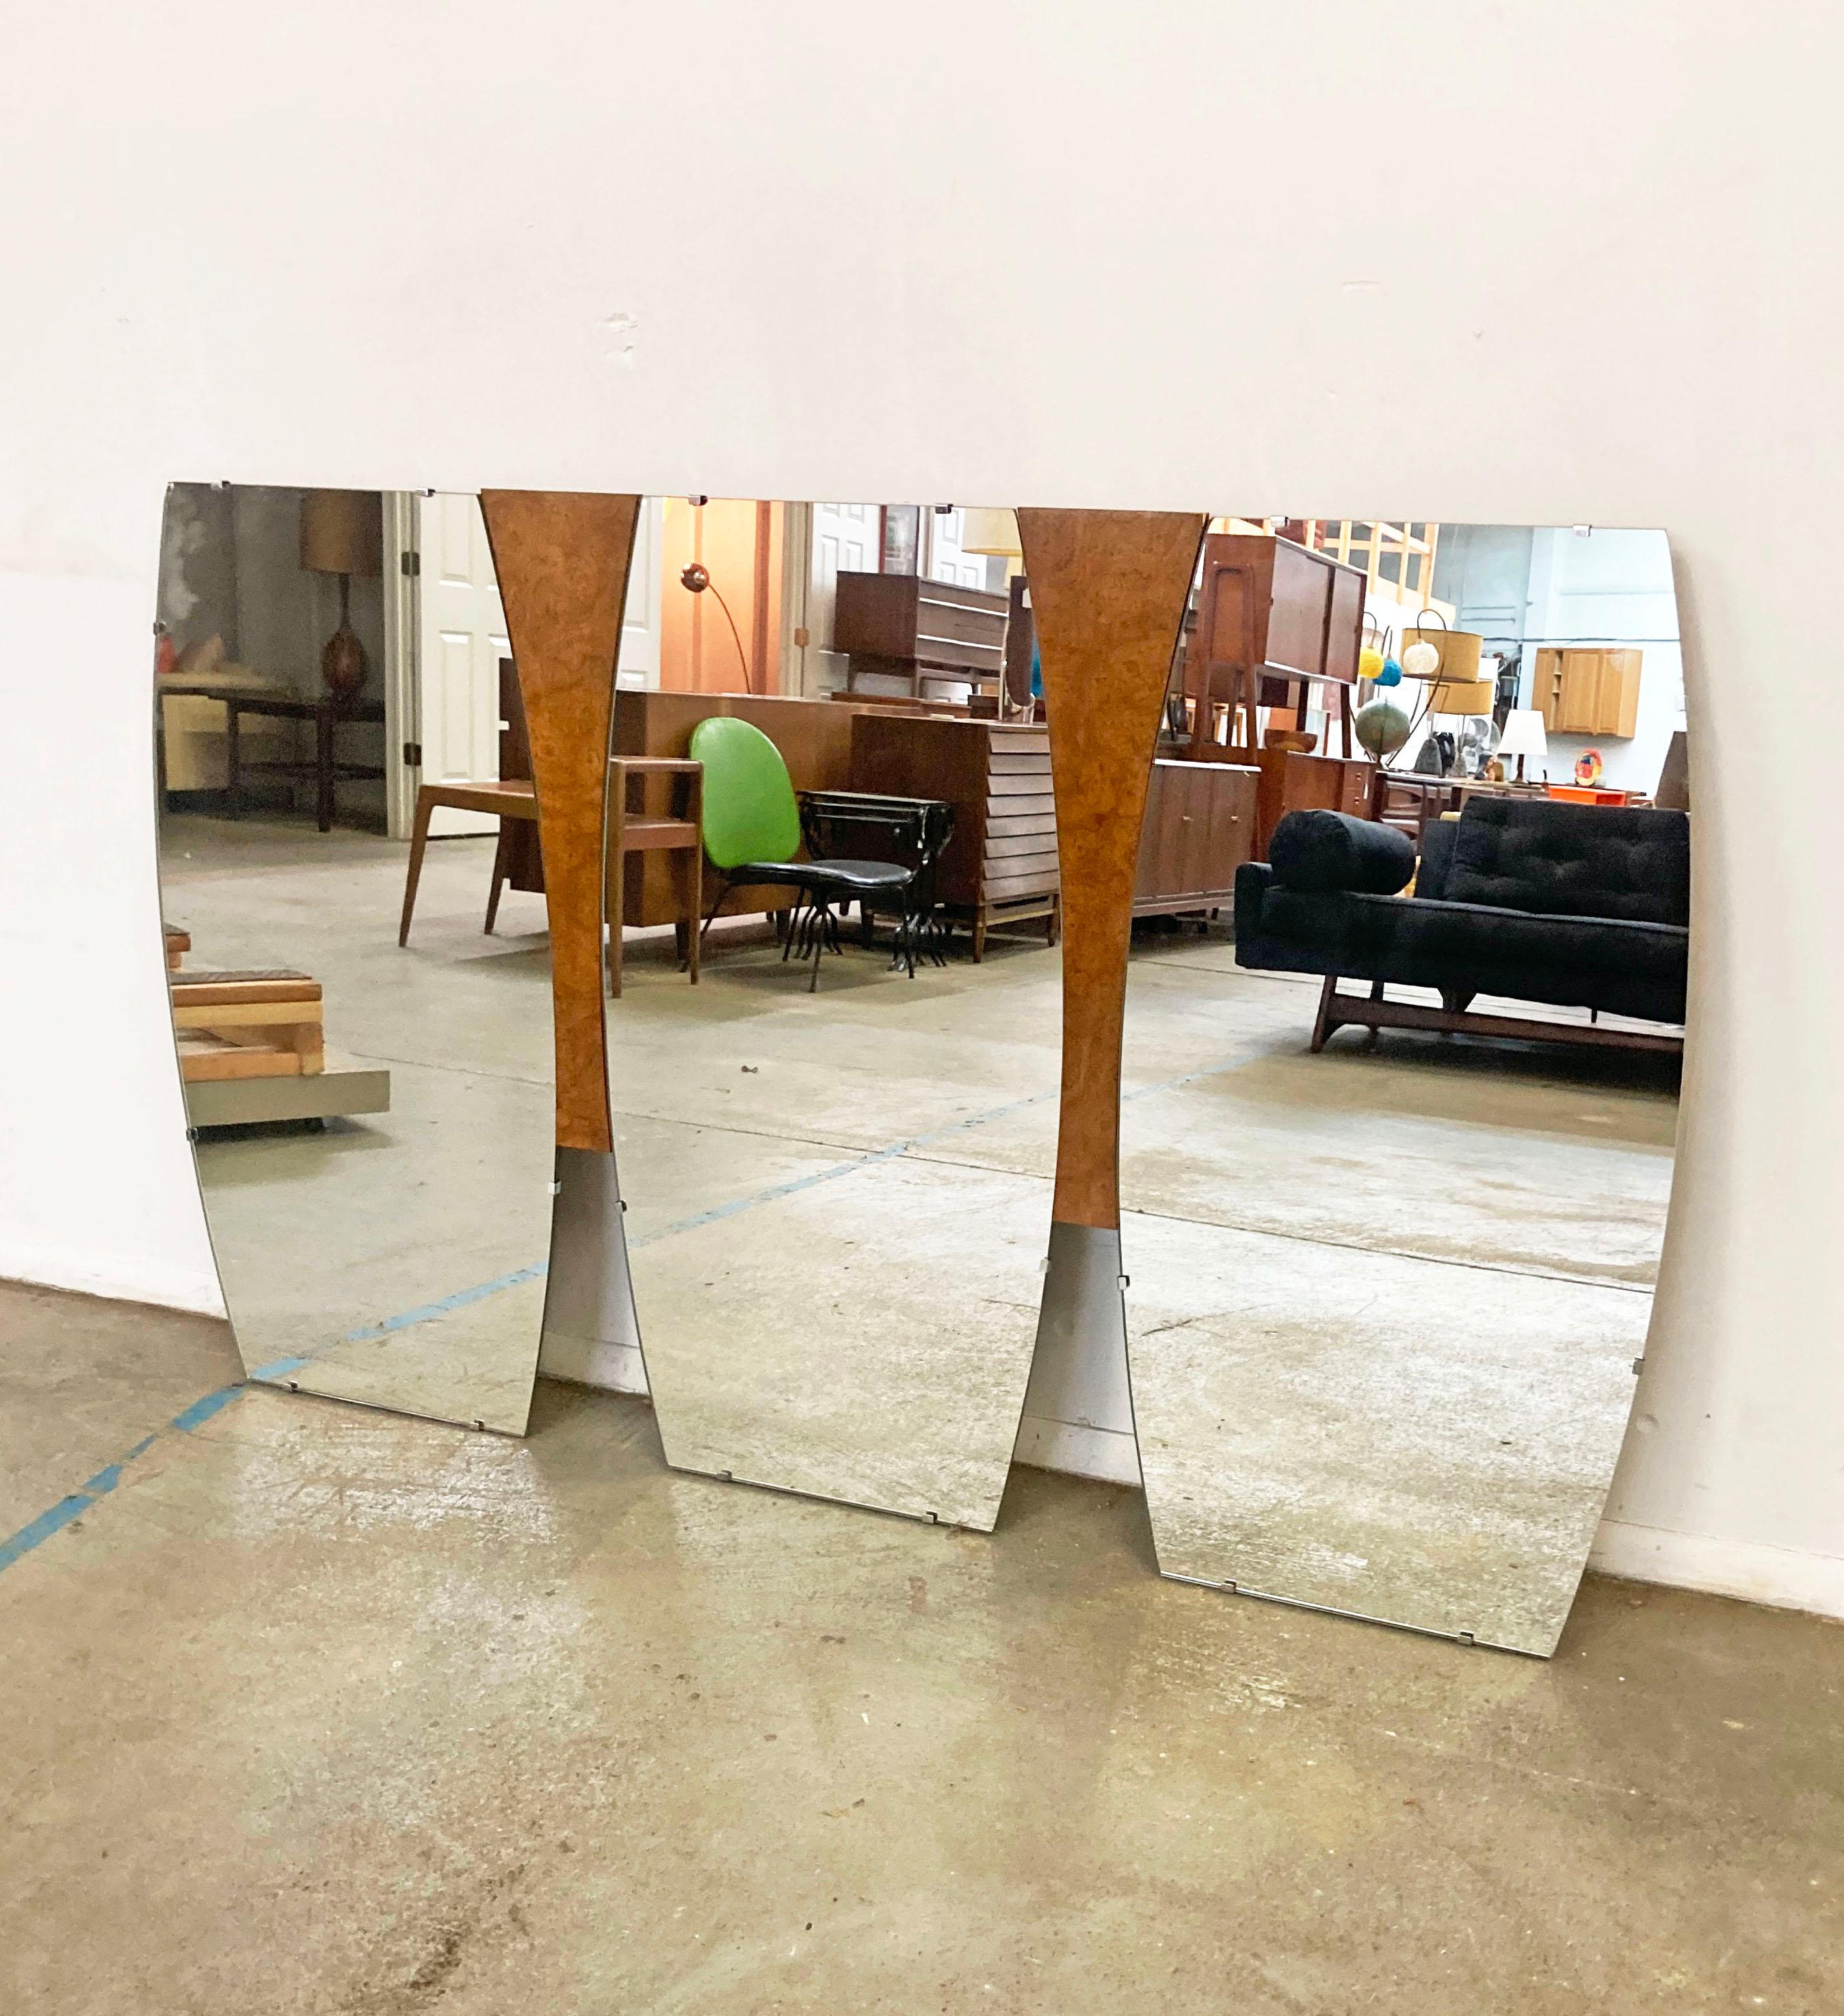 Offered is a cool large Mid-Century Modern mirror (circa 1960s). Features three mirrors attached to a burl wood base. This mirror originally sat on a dresser, but is currently being used as a wall mirror. In good condition, but has one chip on a